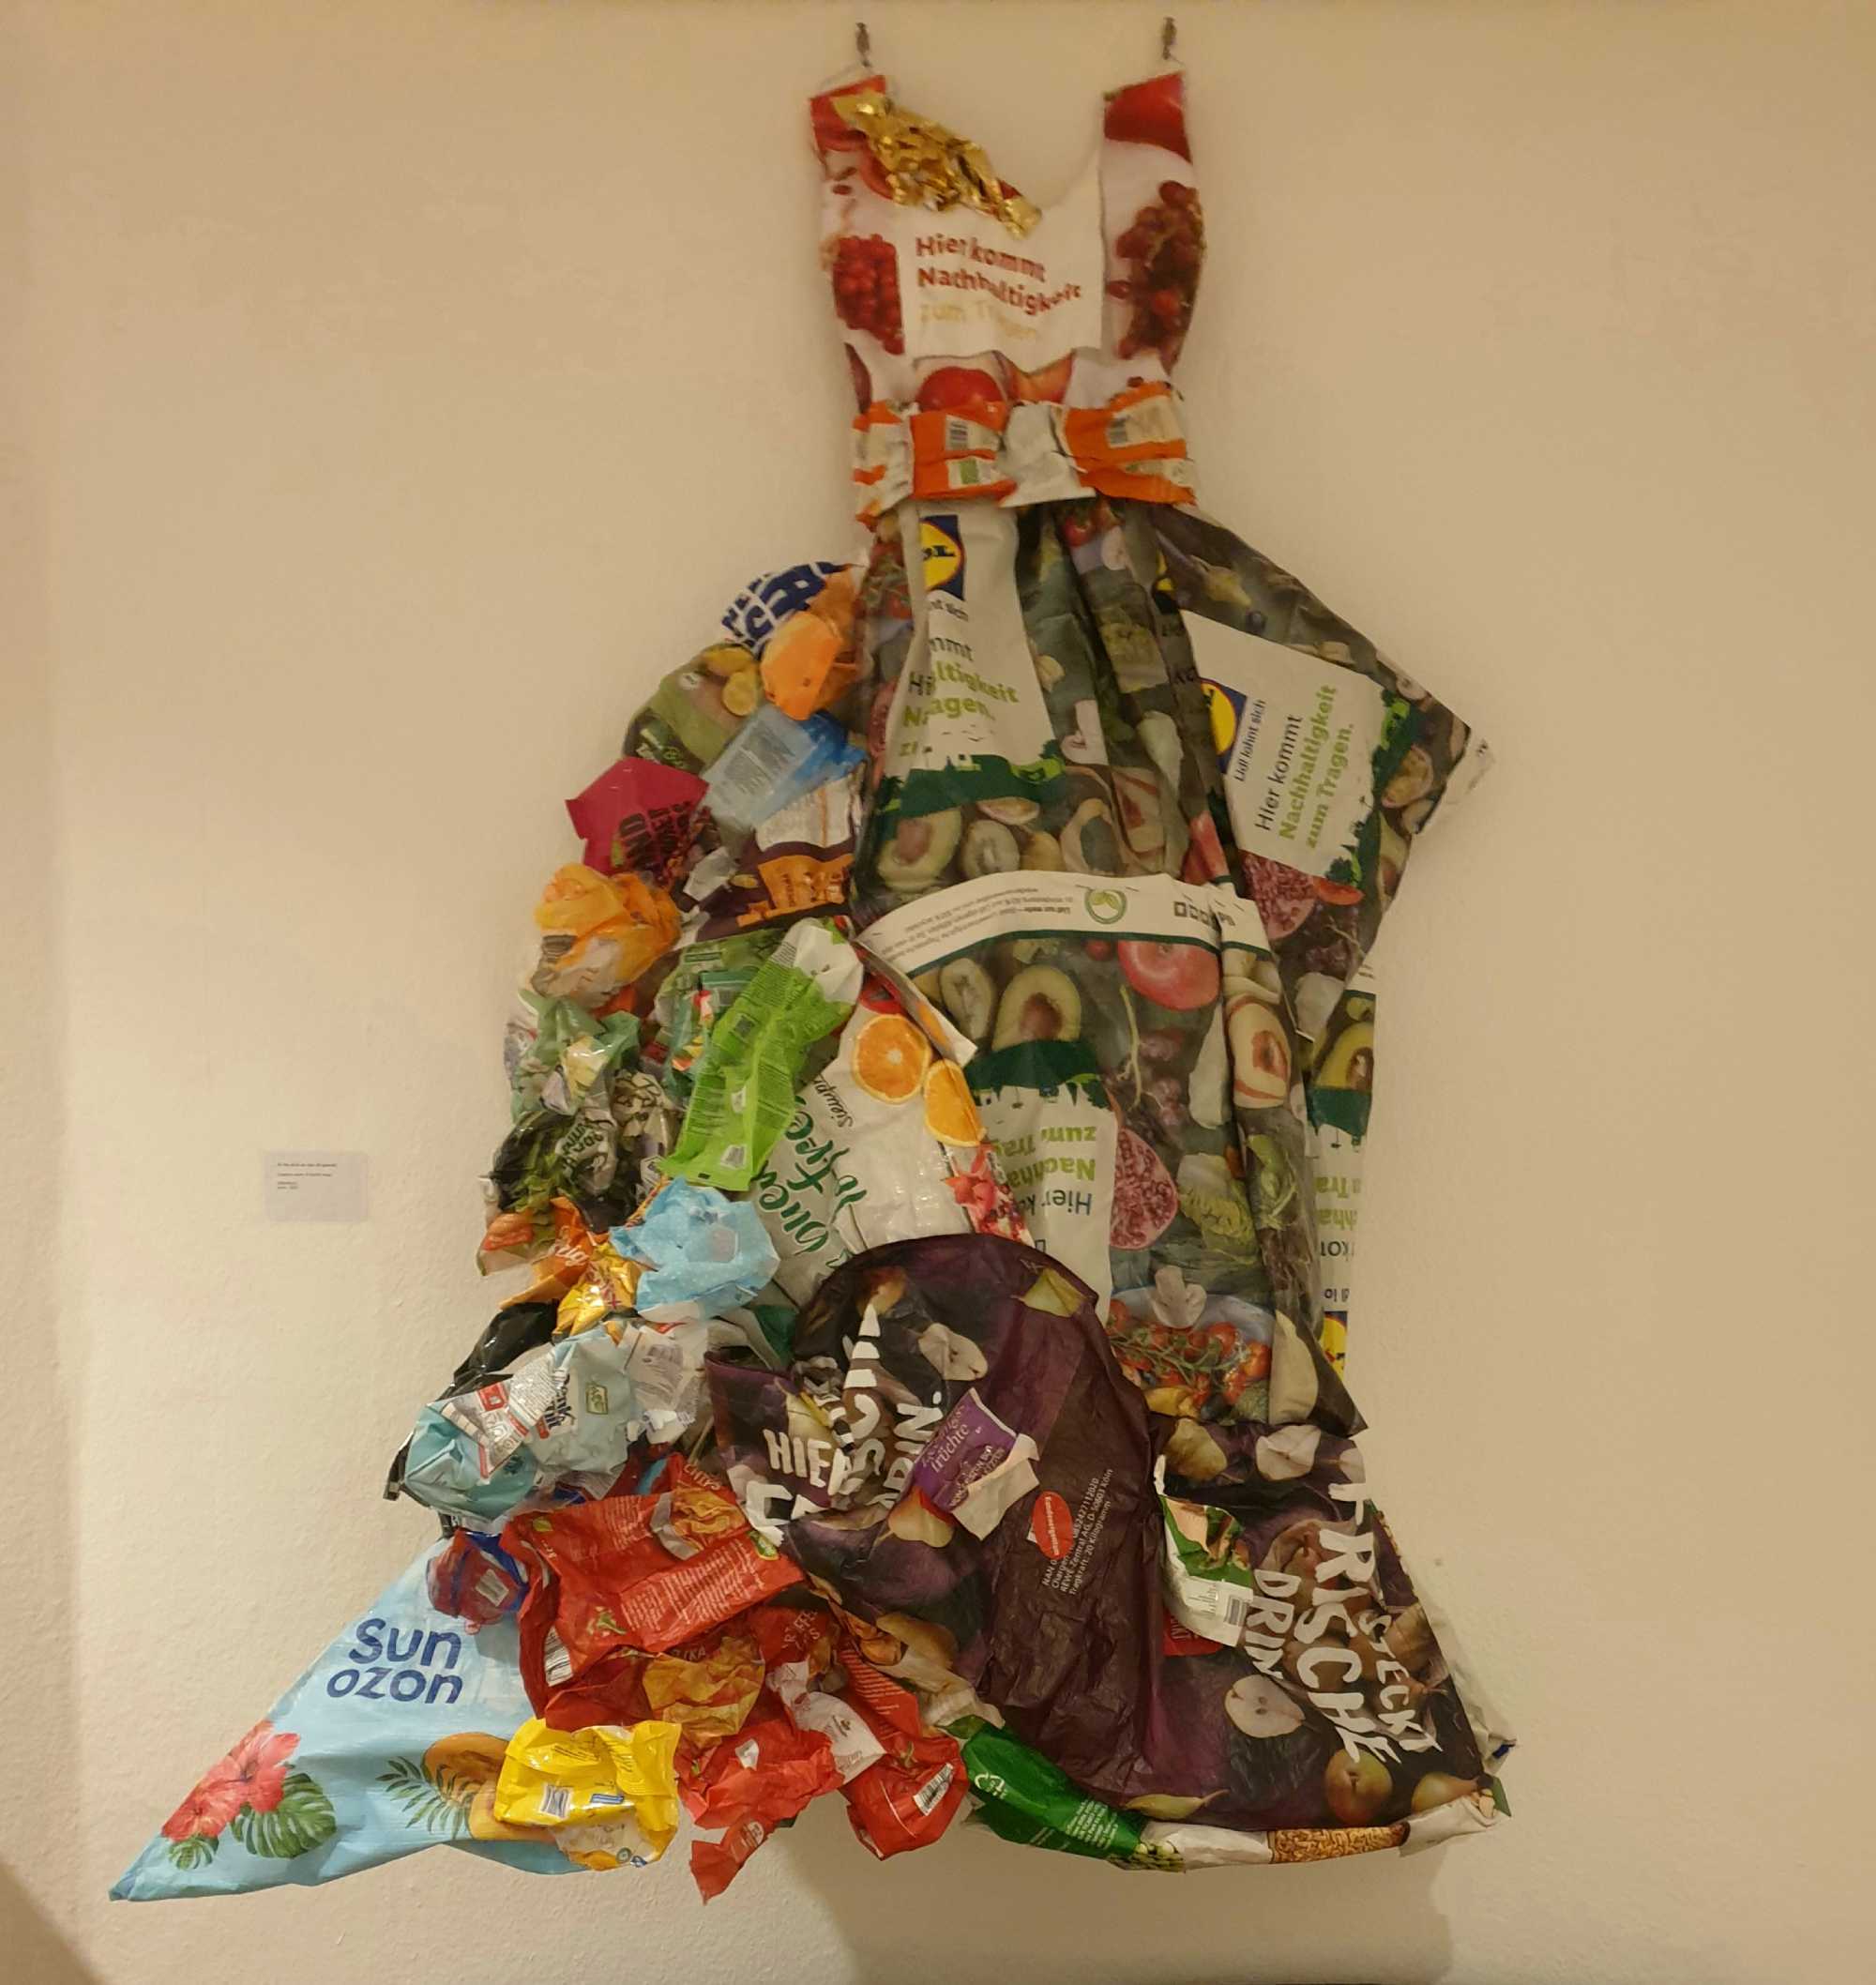 Dresses made of plastic garbage